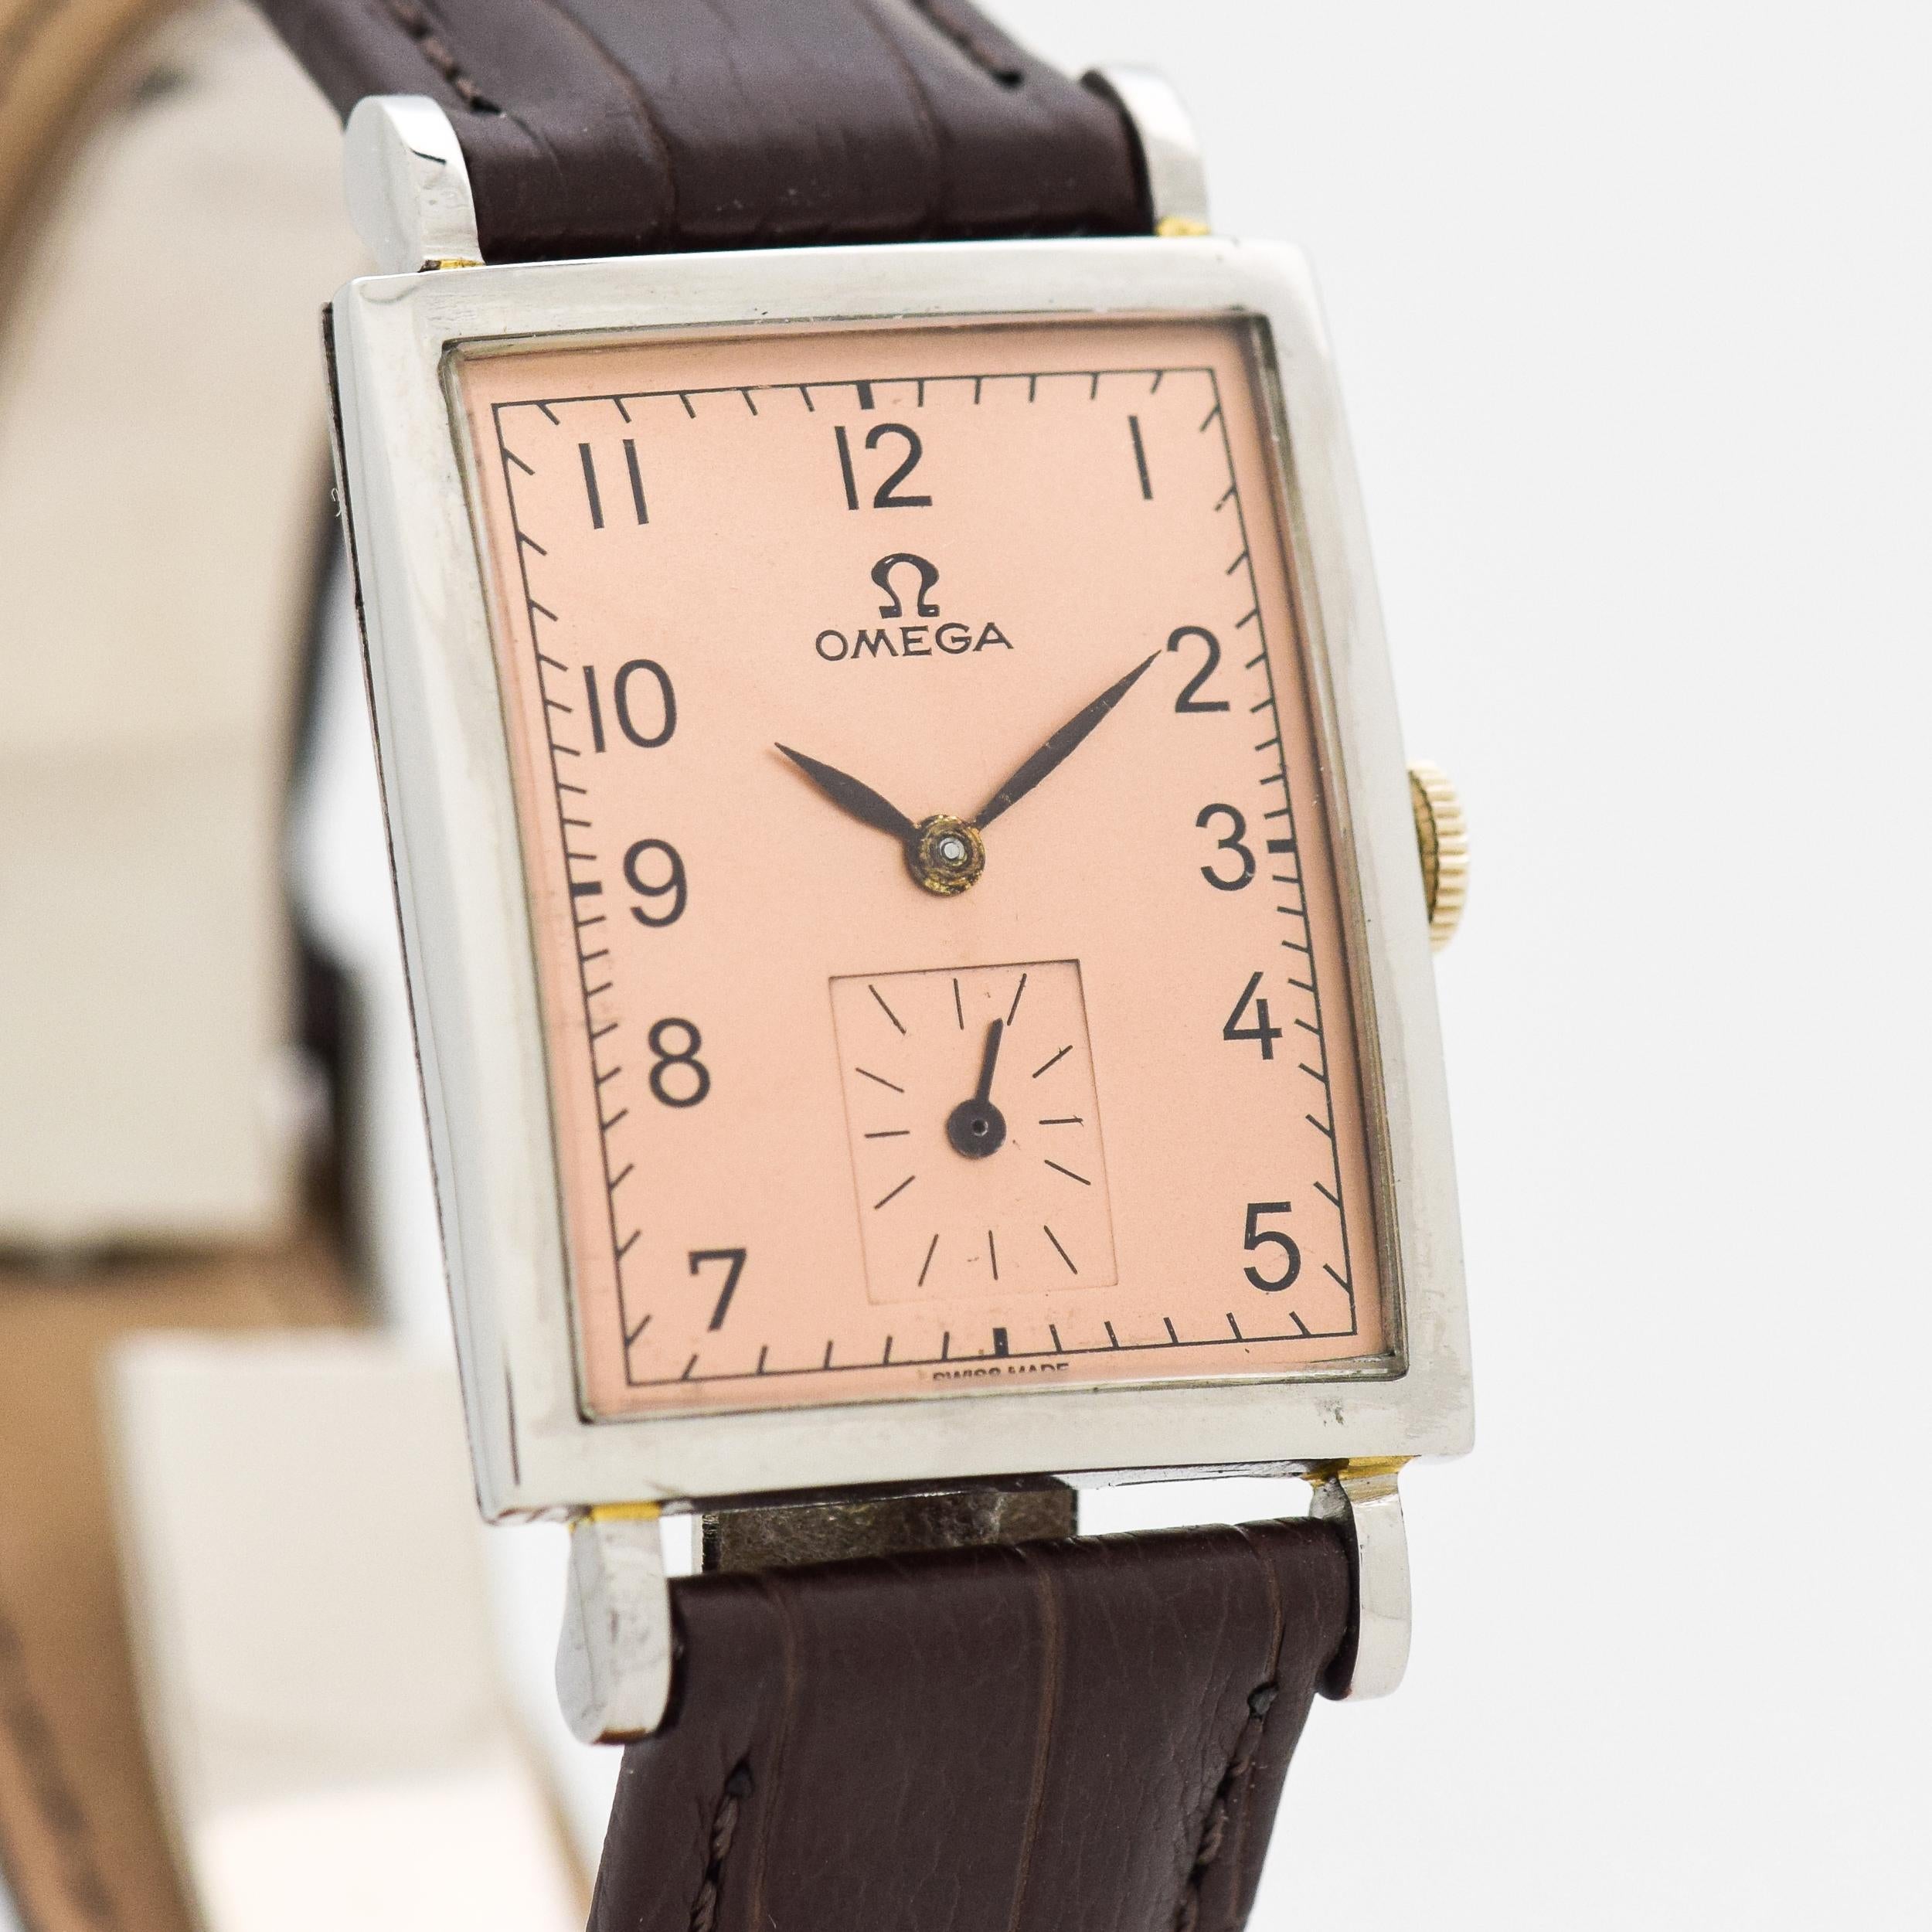 1959 Vintage Omega Rectangle Shape Stainless Steel watch with Salmon Color Dial with Arabic Numbers. 24mm x 40mm lug to lug (0.94 in. x 1.57 in.) - 17 jewel, manual caliber 302 movement. 100% Genuine Alligator Matte Brown-colored Strap. Triple